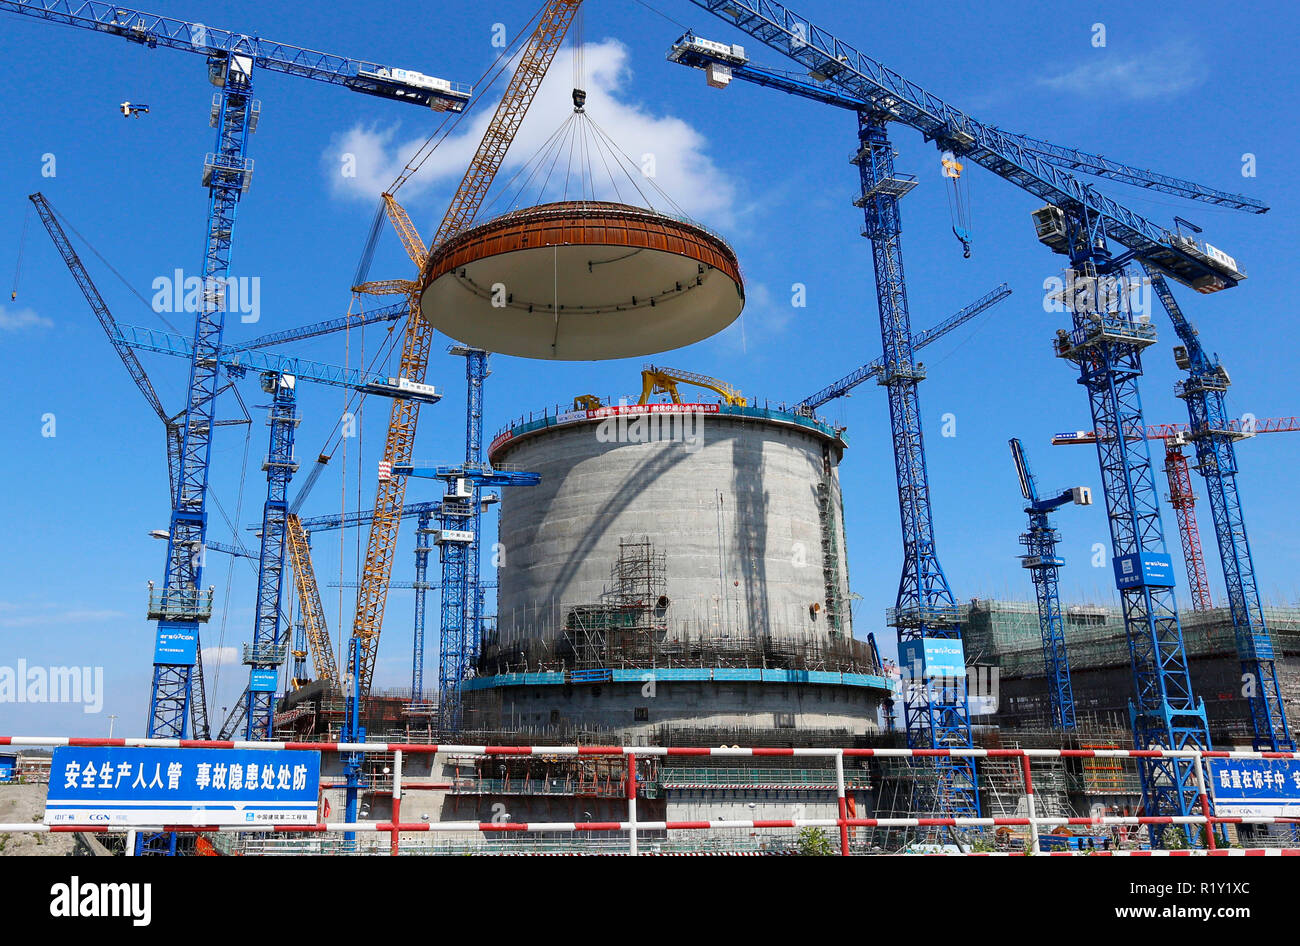 (181115) -- BEIJING, Nov. 15, 2018 (Xinhua) -- Photo taken on May 23, 2018 shows the installation site of a hemispherical dome at the No. 3 unit of Fangchenggang nuclear power station in south China's Guangxi Zhuang Autonomous Region. According to the National Bureau of Statistics, China's power generation rose 7.2 percent year-on-year in the first 10 months of 2018. In October alone, China generated 533 billion kilowatt-hours (kWh) of power, up 4.8 percent year on year, faster than the 4.6-percent growth in September. The average daily power generation reached 17.2 billion kWh, edging down fr Stock Photo